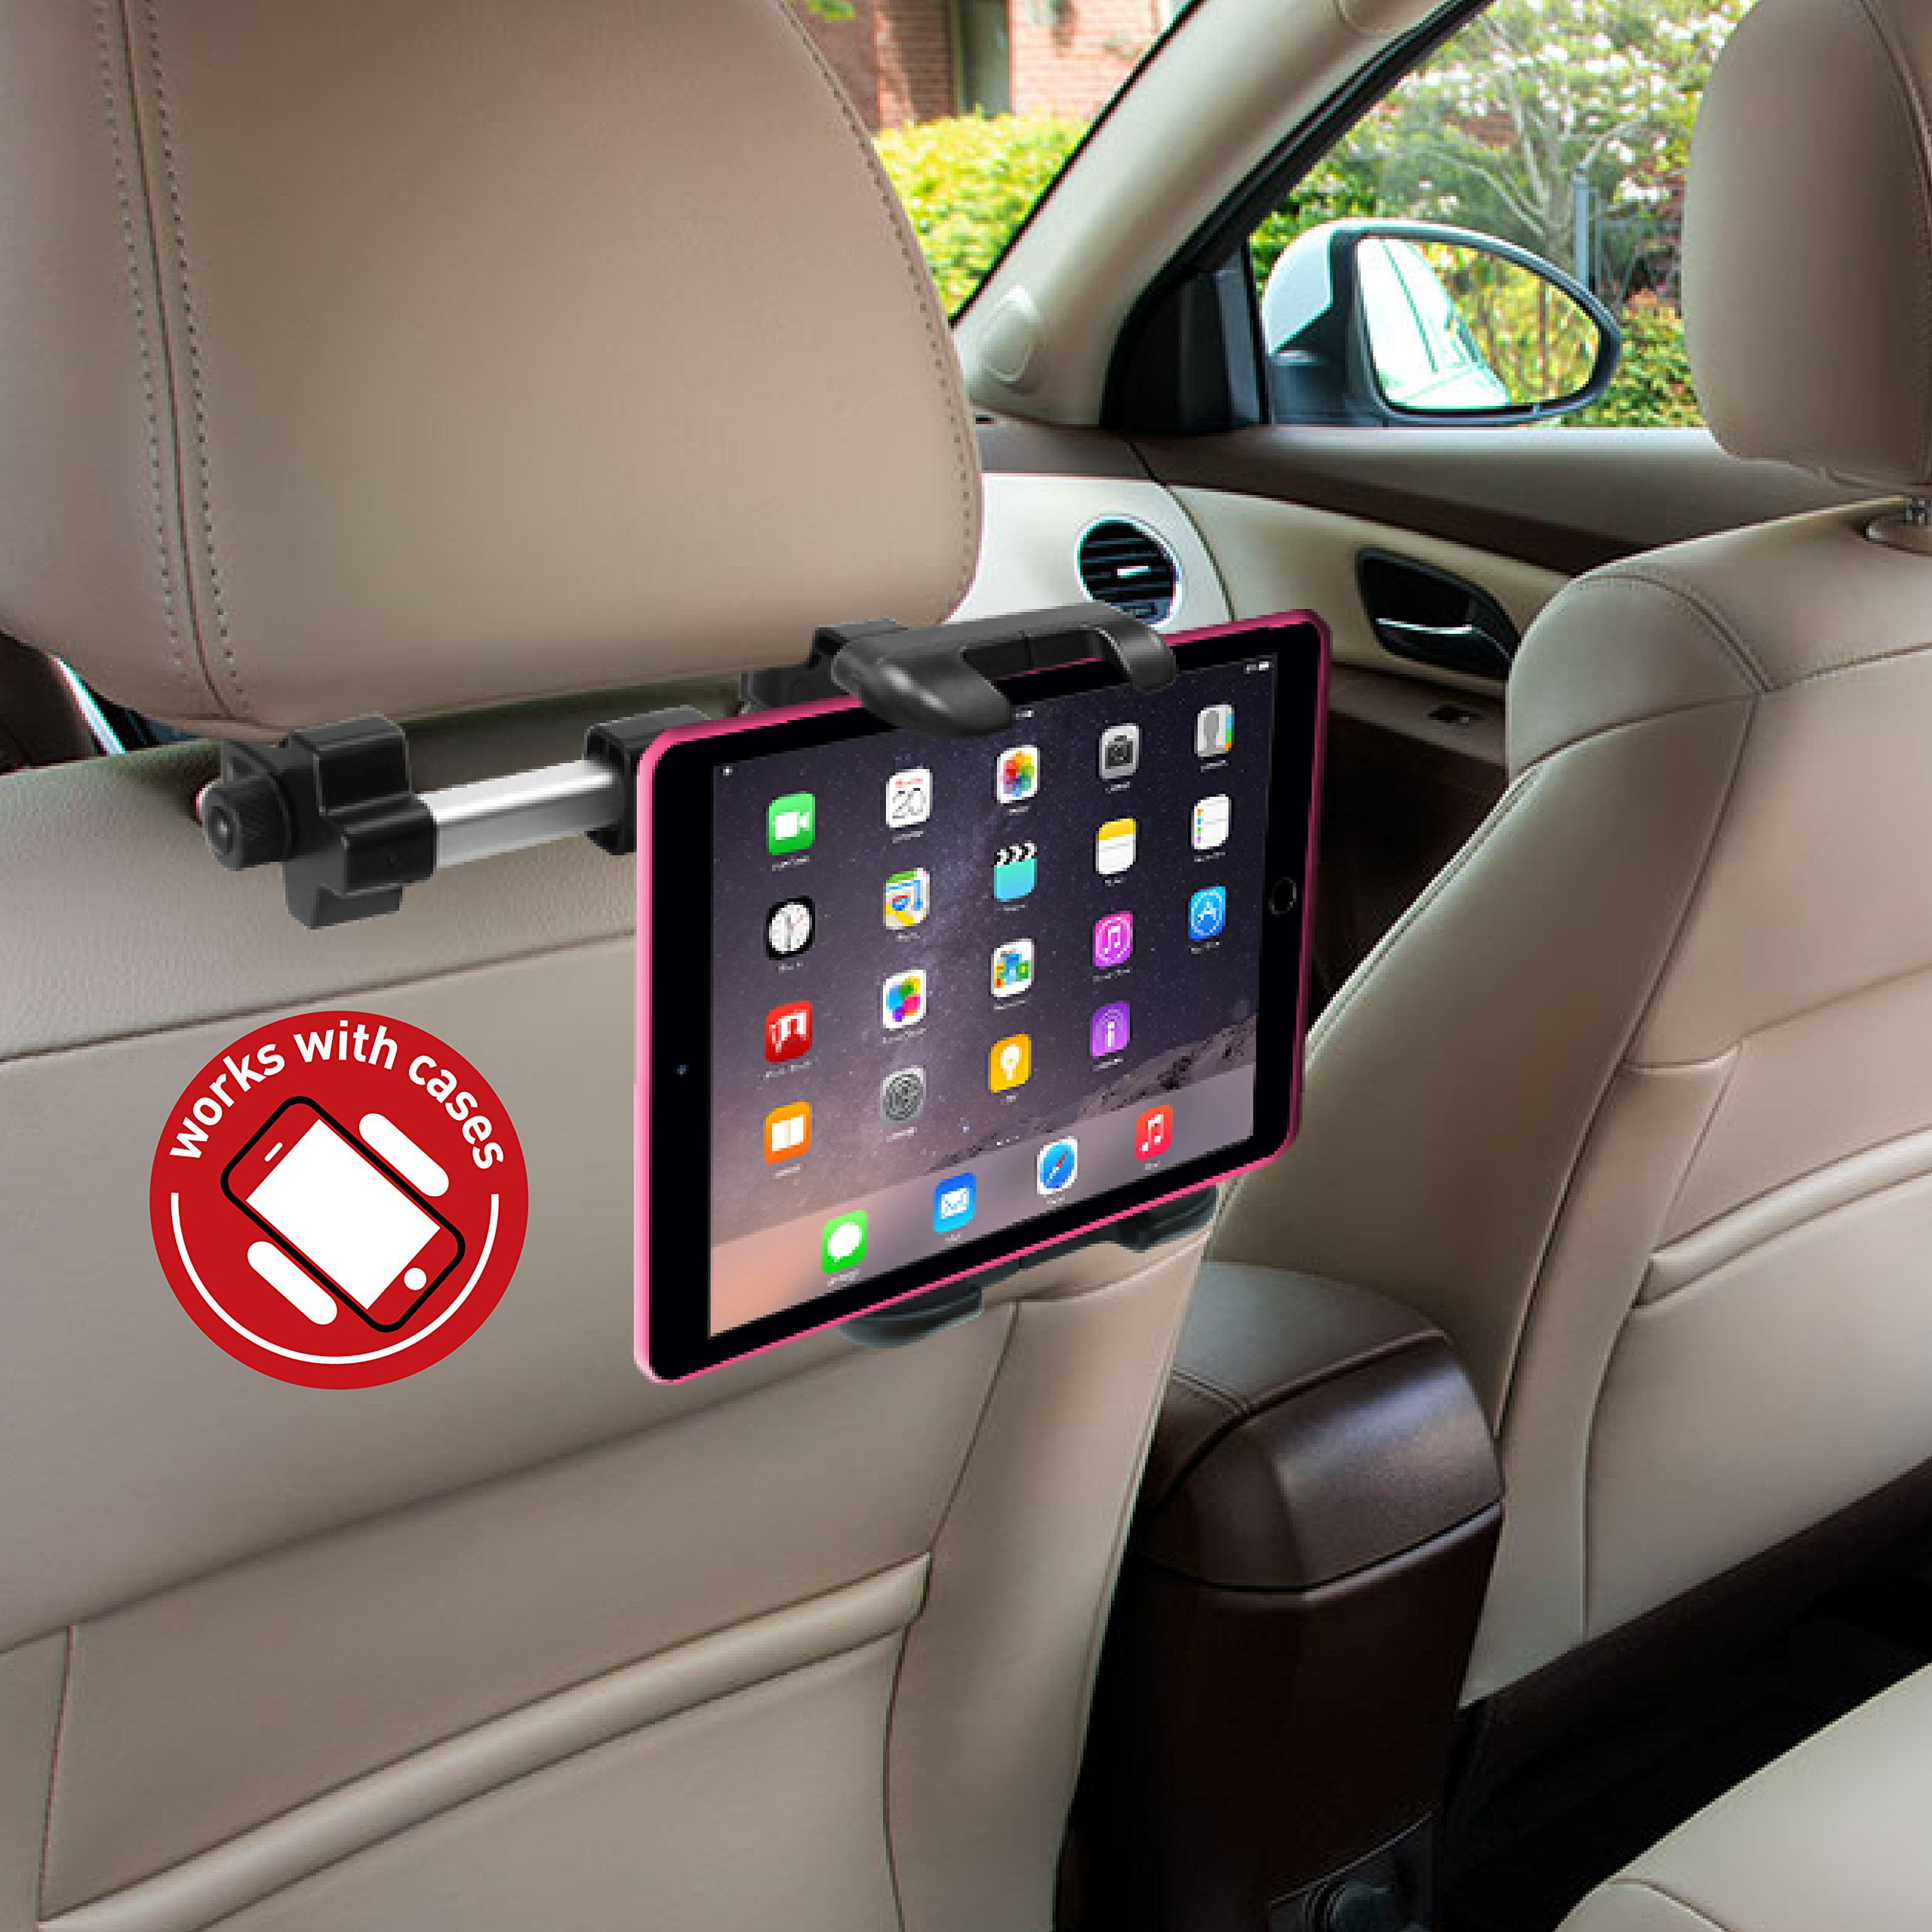 Macally Car Headrest Mount Holder for Apple iPad Pro/Air/Mini, Tablets,  Nintendo Switch, iPhone, Smartphones 4.5 to 10 Wide with Dual Adjustable